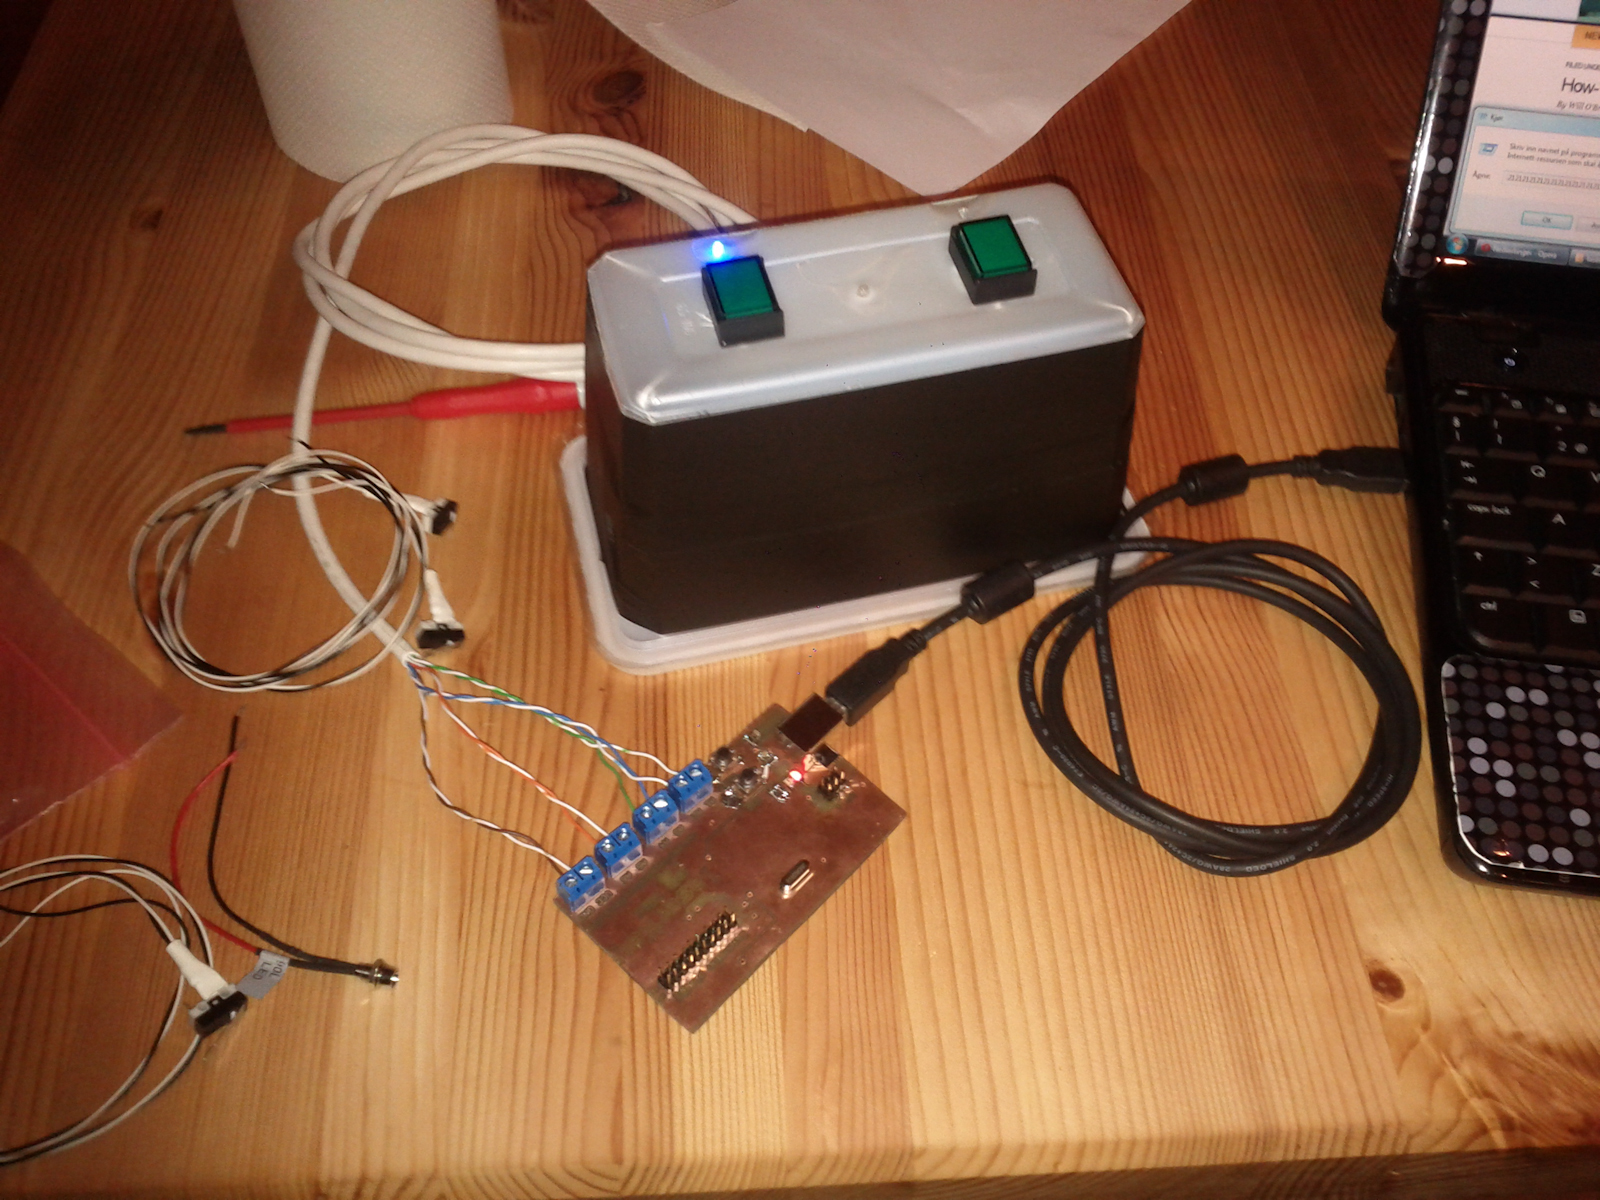 Testing the LaserKey and Temp Box with the computer, and it works fine after some software tweaking :D